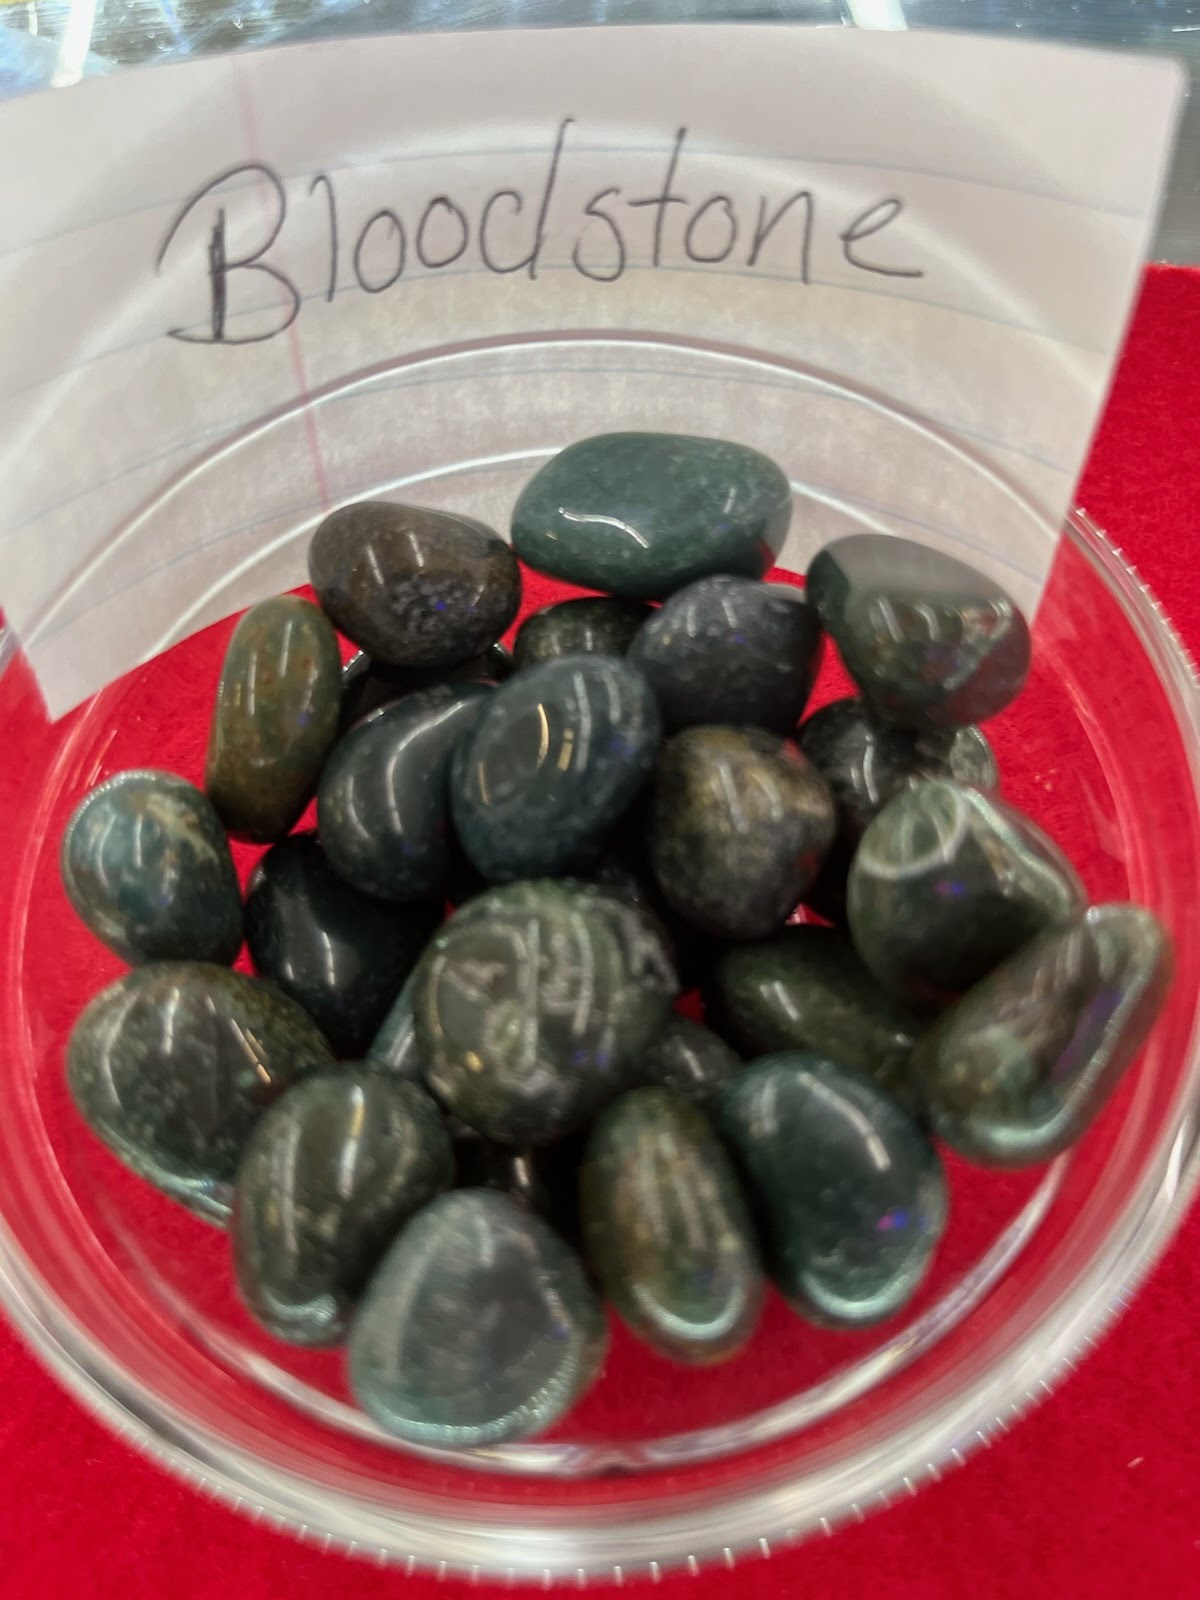 A bowl of blood stone is sitting on the table.